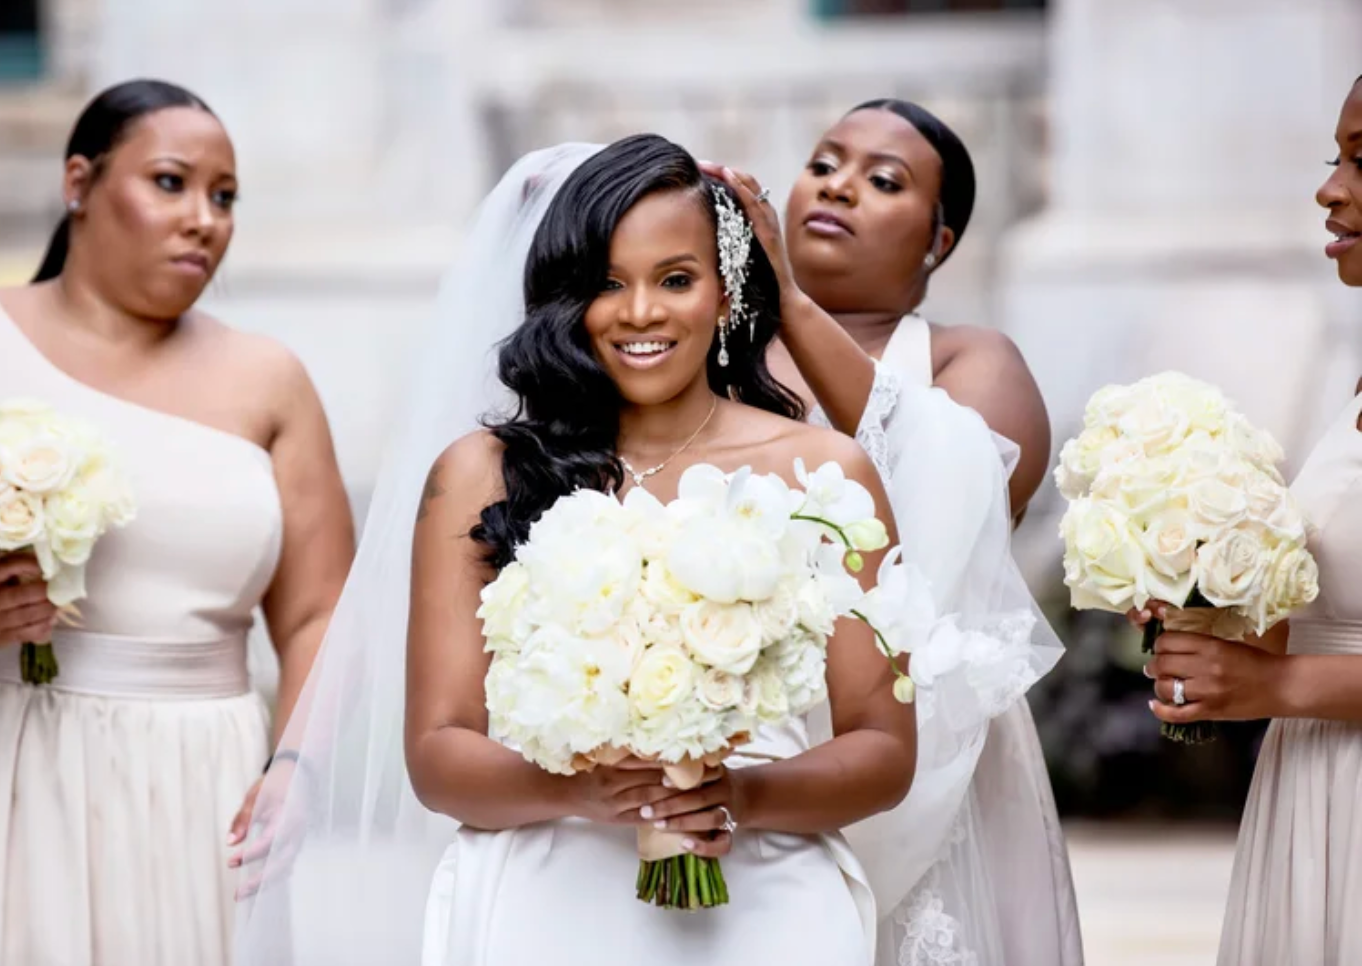 Bridal Bliss: 10 Sweet Photos Of Joyful Brides That Will Make Your Day